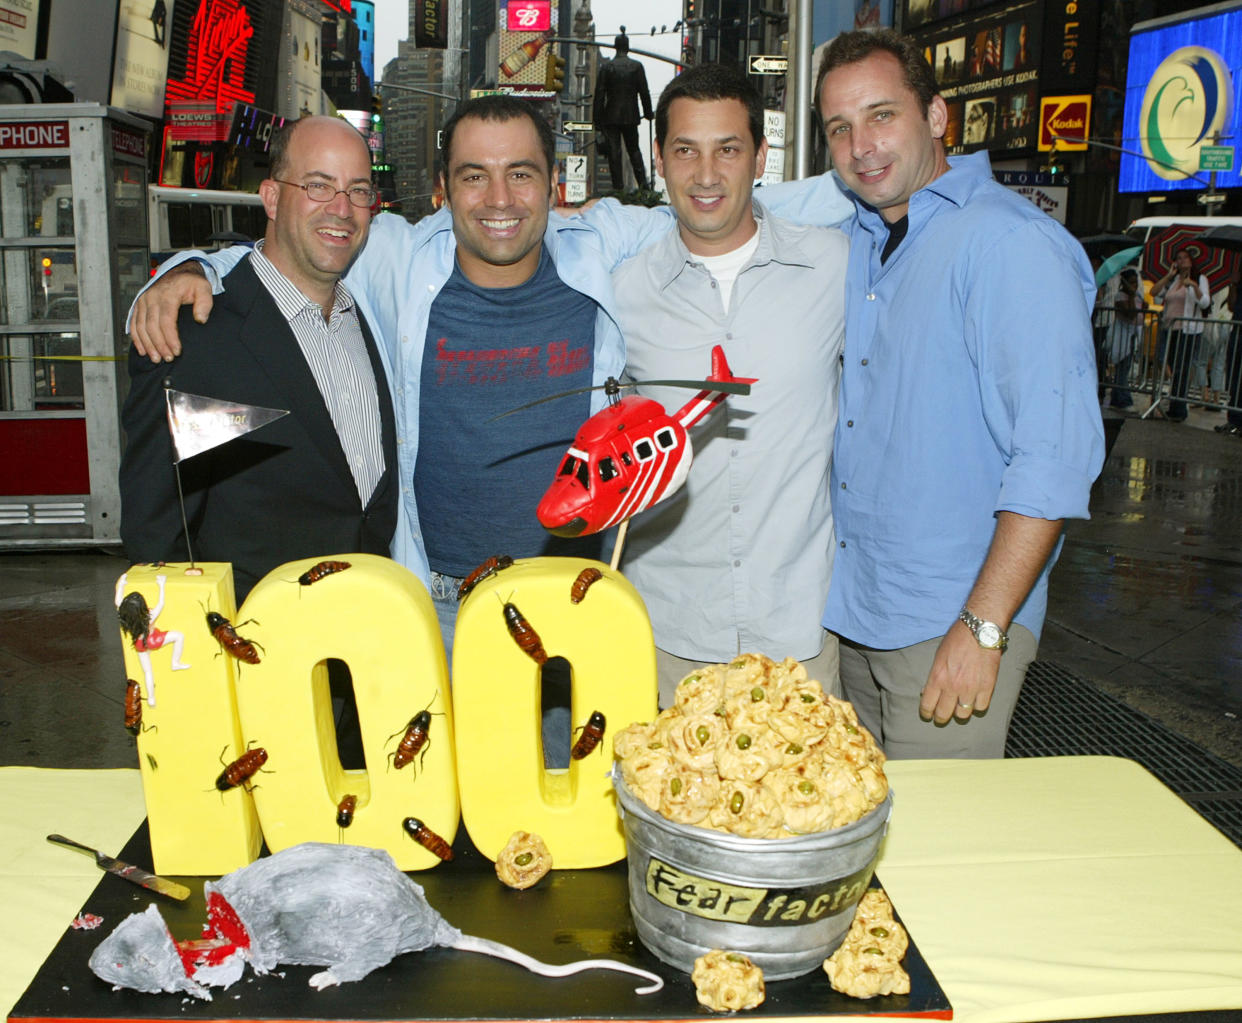 NEW YORK - JULY 12:  (L-R) NBC President Jeff Zucker, Fear Factor host Joe Rogan and executive producers Matt Kunitz and David Hurwitz attend the show's 100th episode celebration in Times Square July 12, 2004 in New York City.  (Photo by Peter Kramer/Getty Images)
